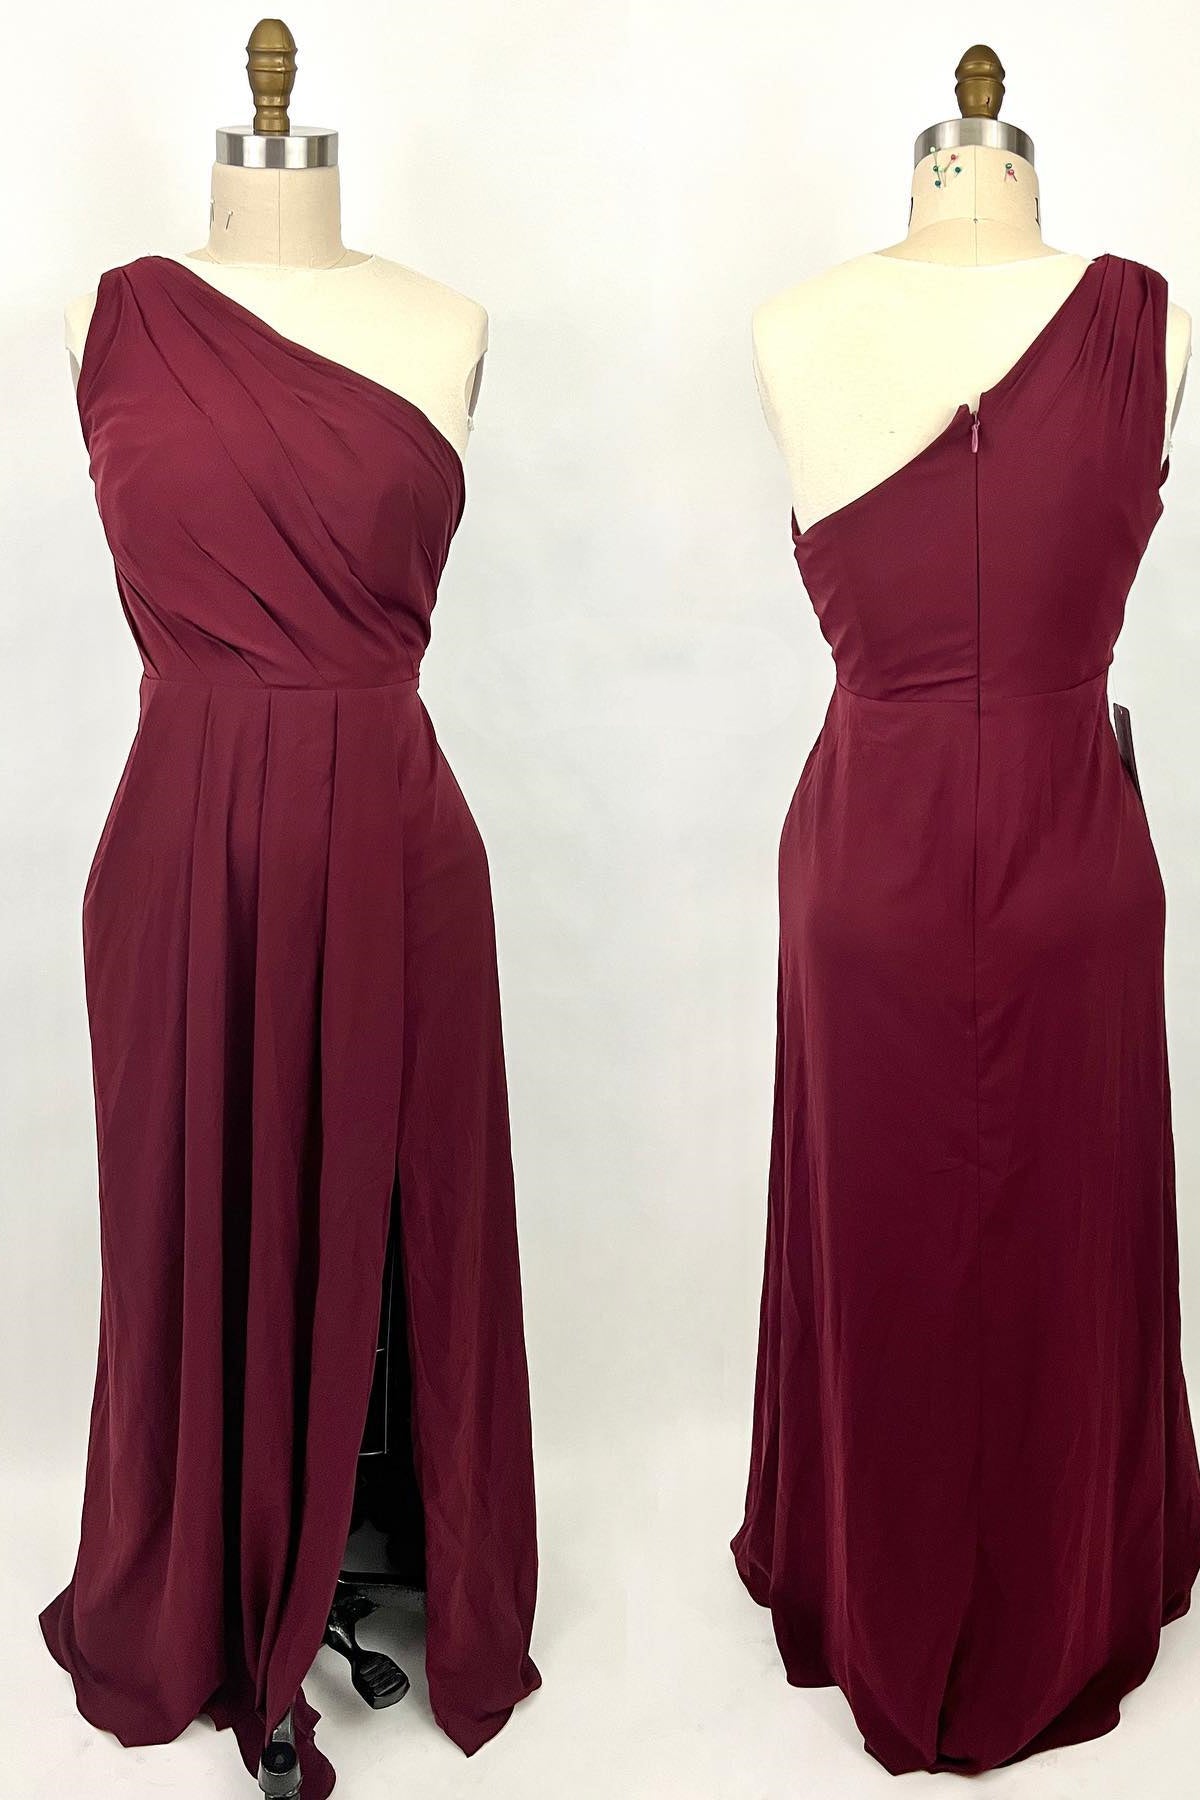 Satin Prom Dress, Ruched Wine Red One Shoulder A-line Long Bridesmaid Dress